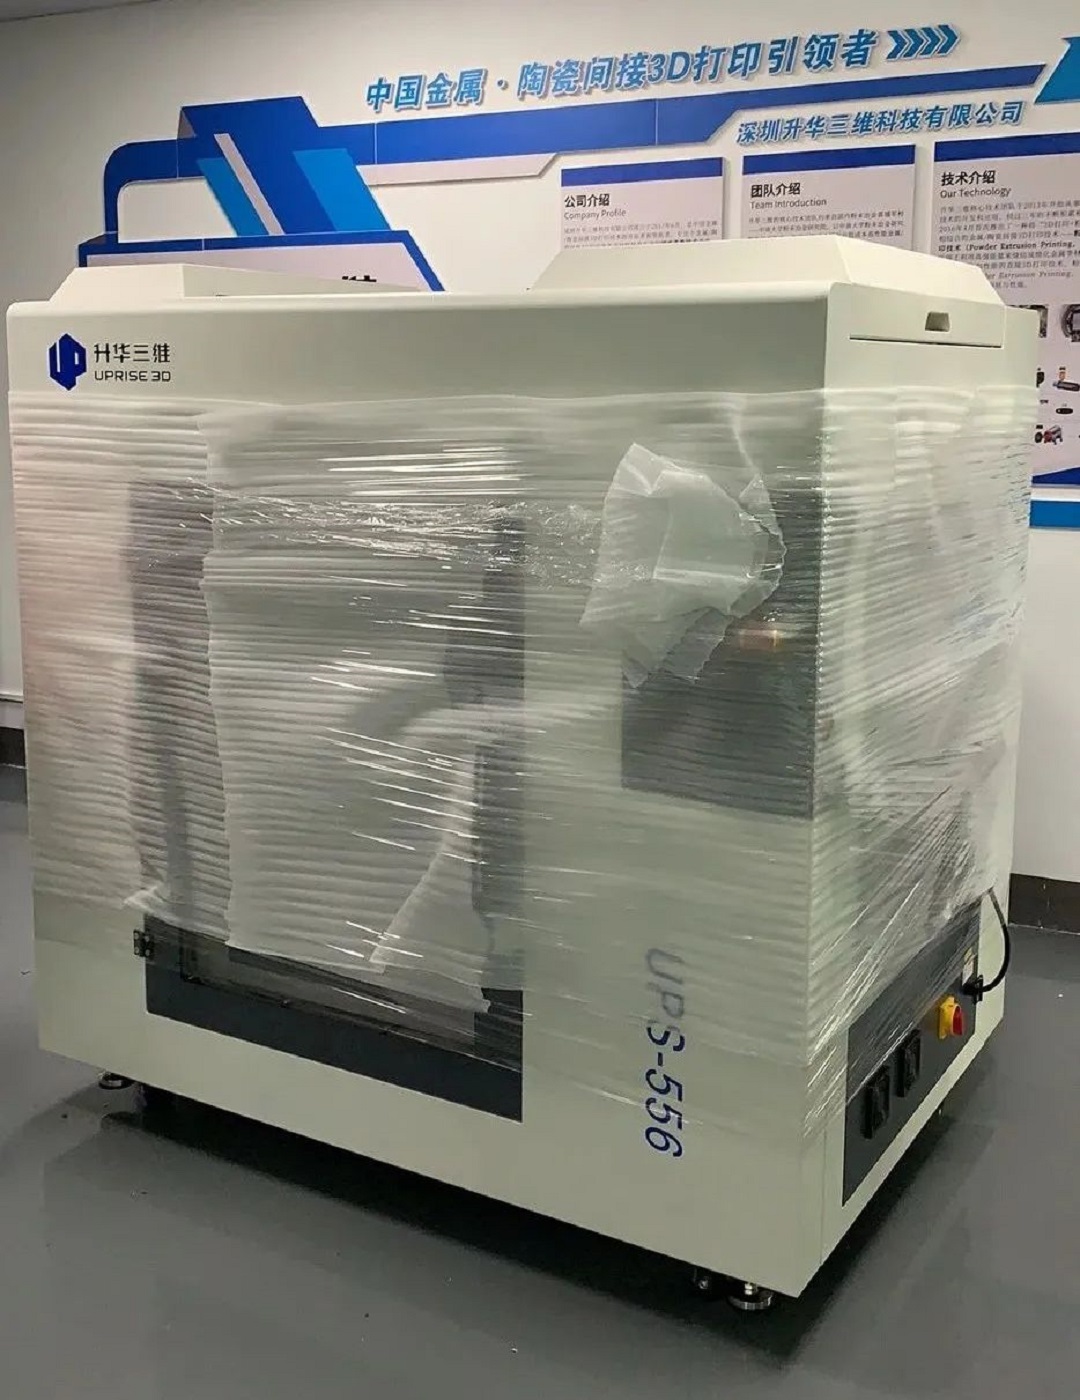 Delivery of Large Size 3D Printer UPS-556